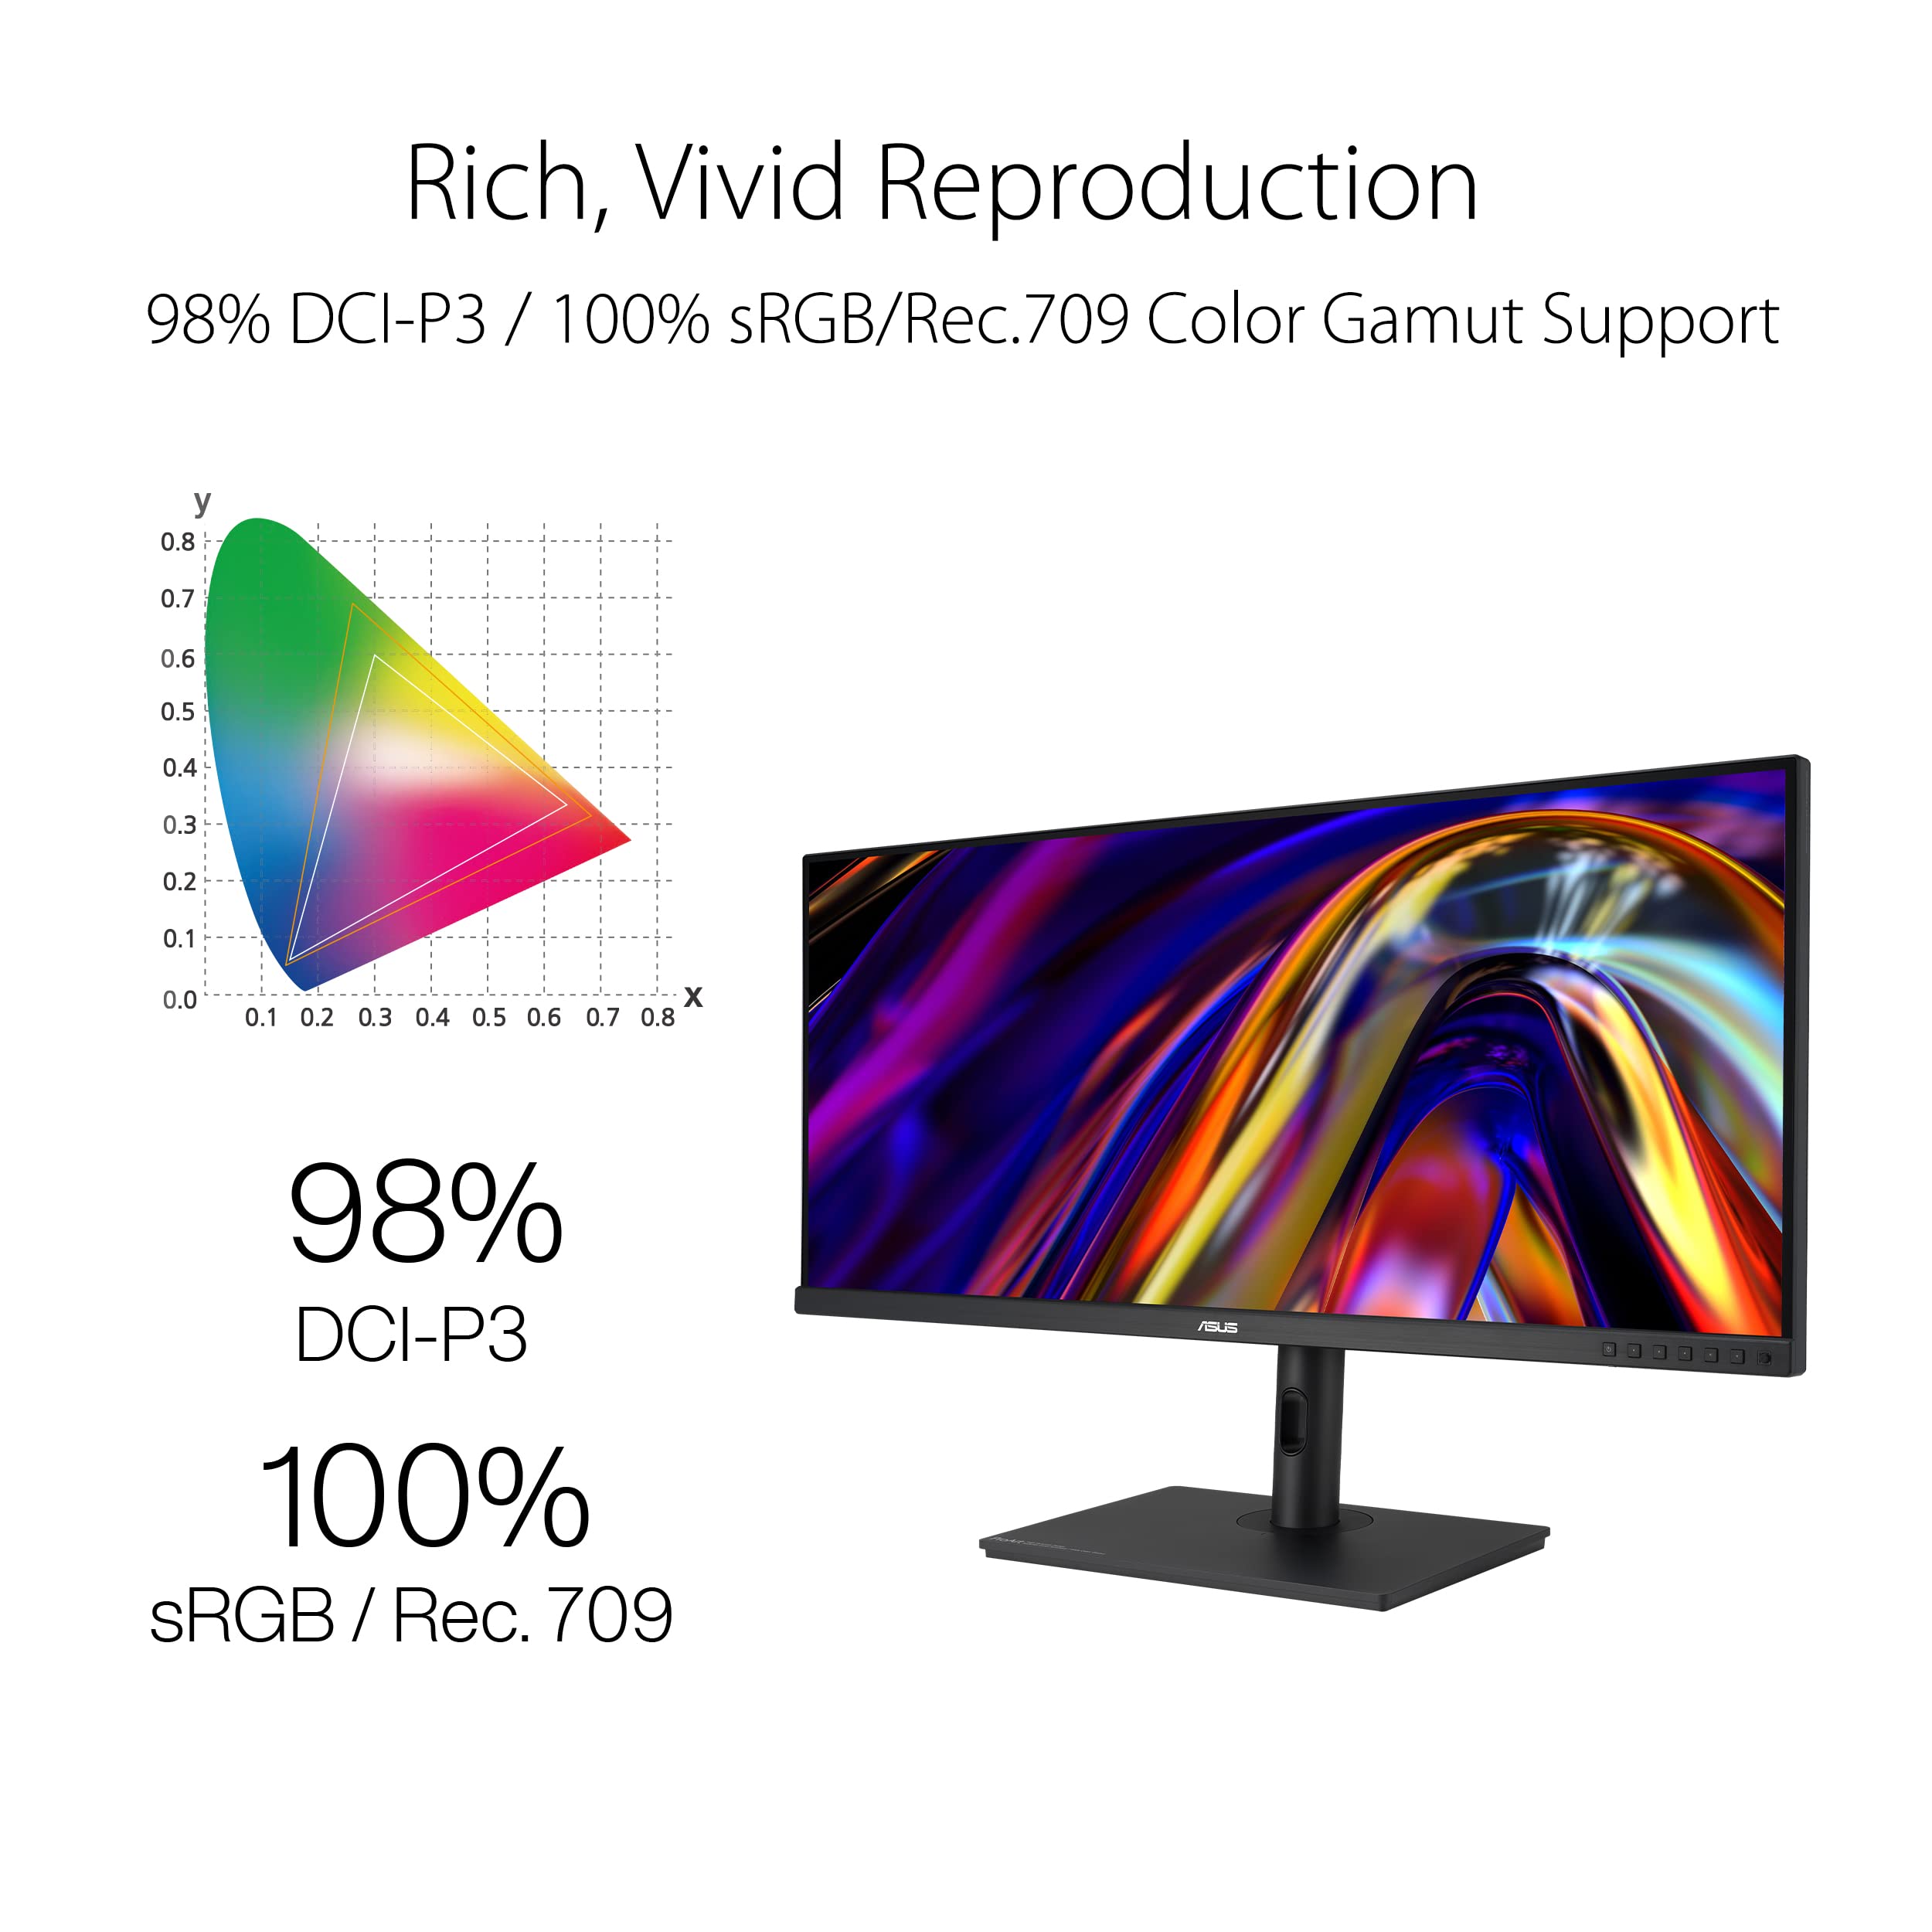 ASUS ProArt Display 34” Computer Monitor (PA348CGV) - 21:9 Ultra-Wide QHD (3440 x 1440), IPS, Color Accuracy ΔE  2, Calman Verified, 98% DCI-P3, USB-C, 120Hz, Compatible with Laptop & Mac Monitor